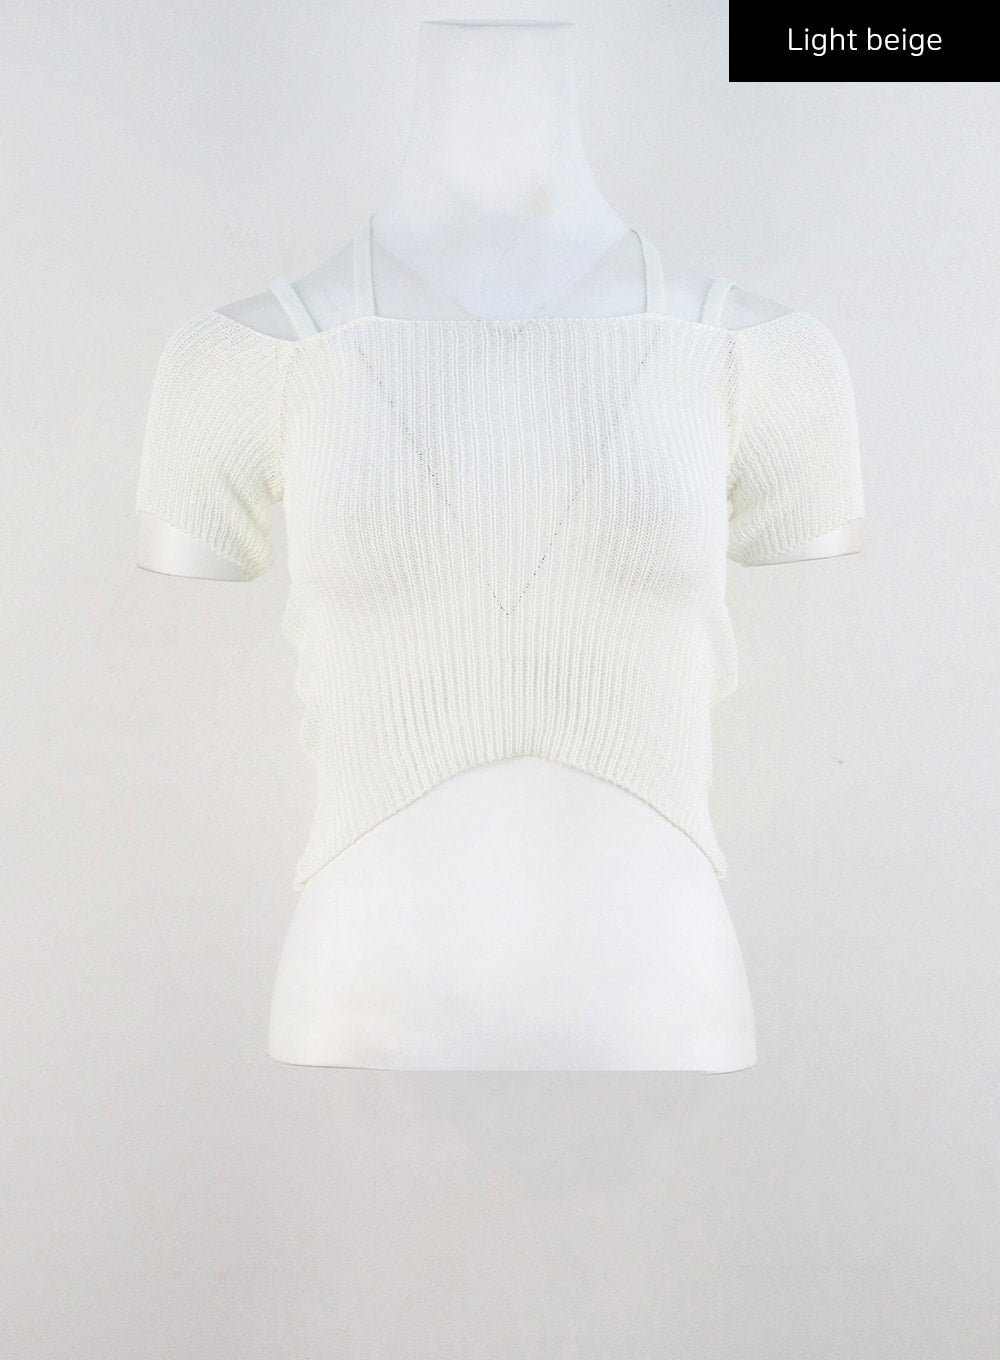 Off The Shoulder Ribbed Top in Bright White